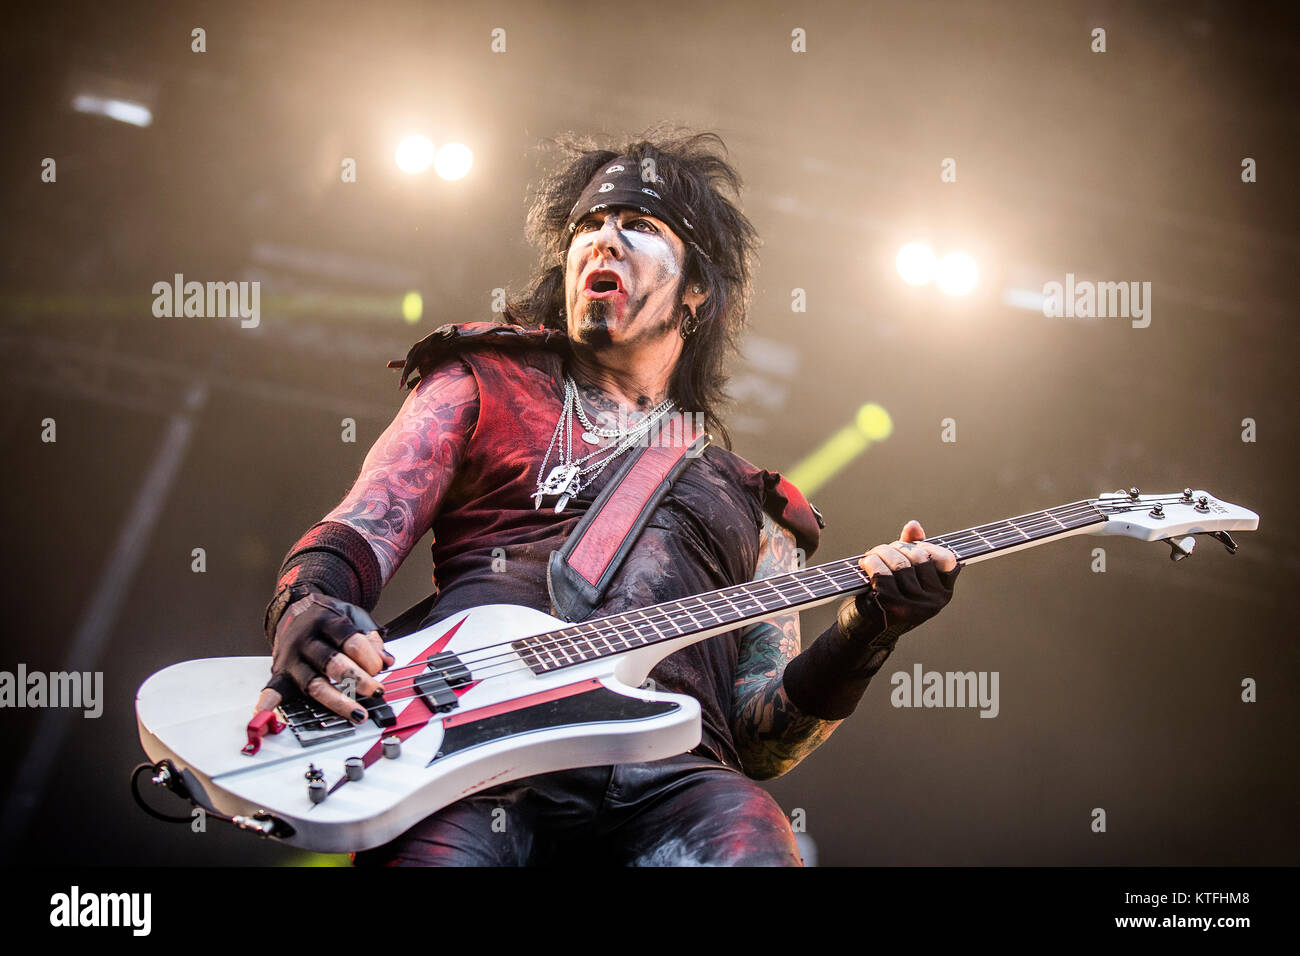 The American hard rock band Sixx:A.M performs a live concert at the  Norwegian music festival Tons of Rock 2016. Here bass player Nikki Sixx is  seen live on stage. Norway, 24/06 2016